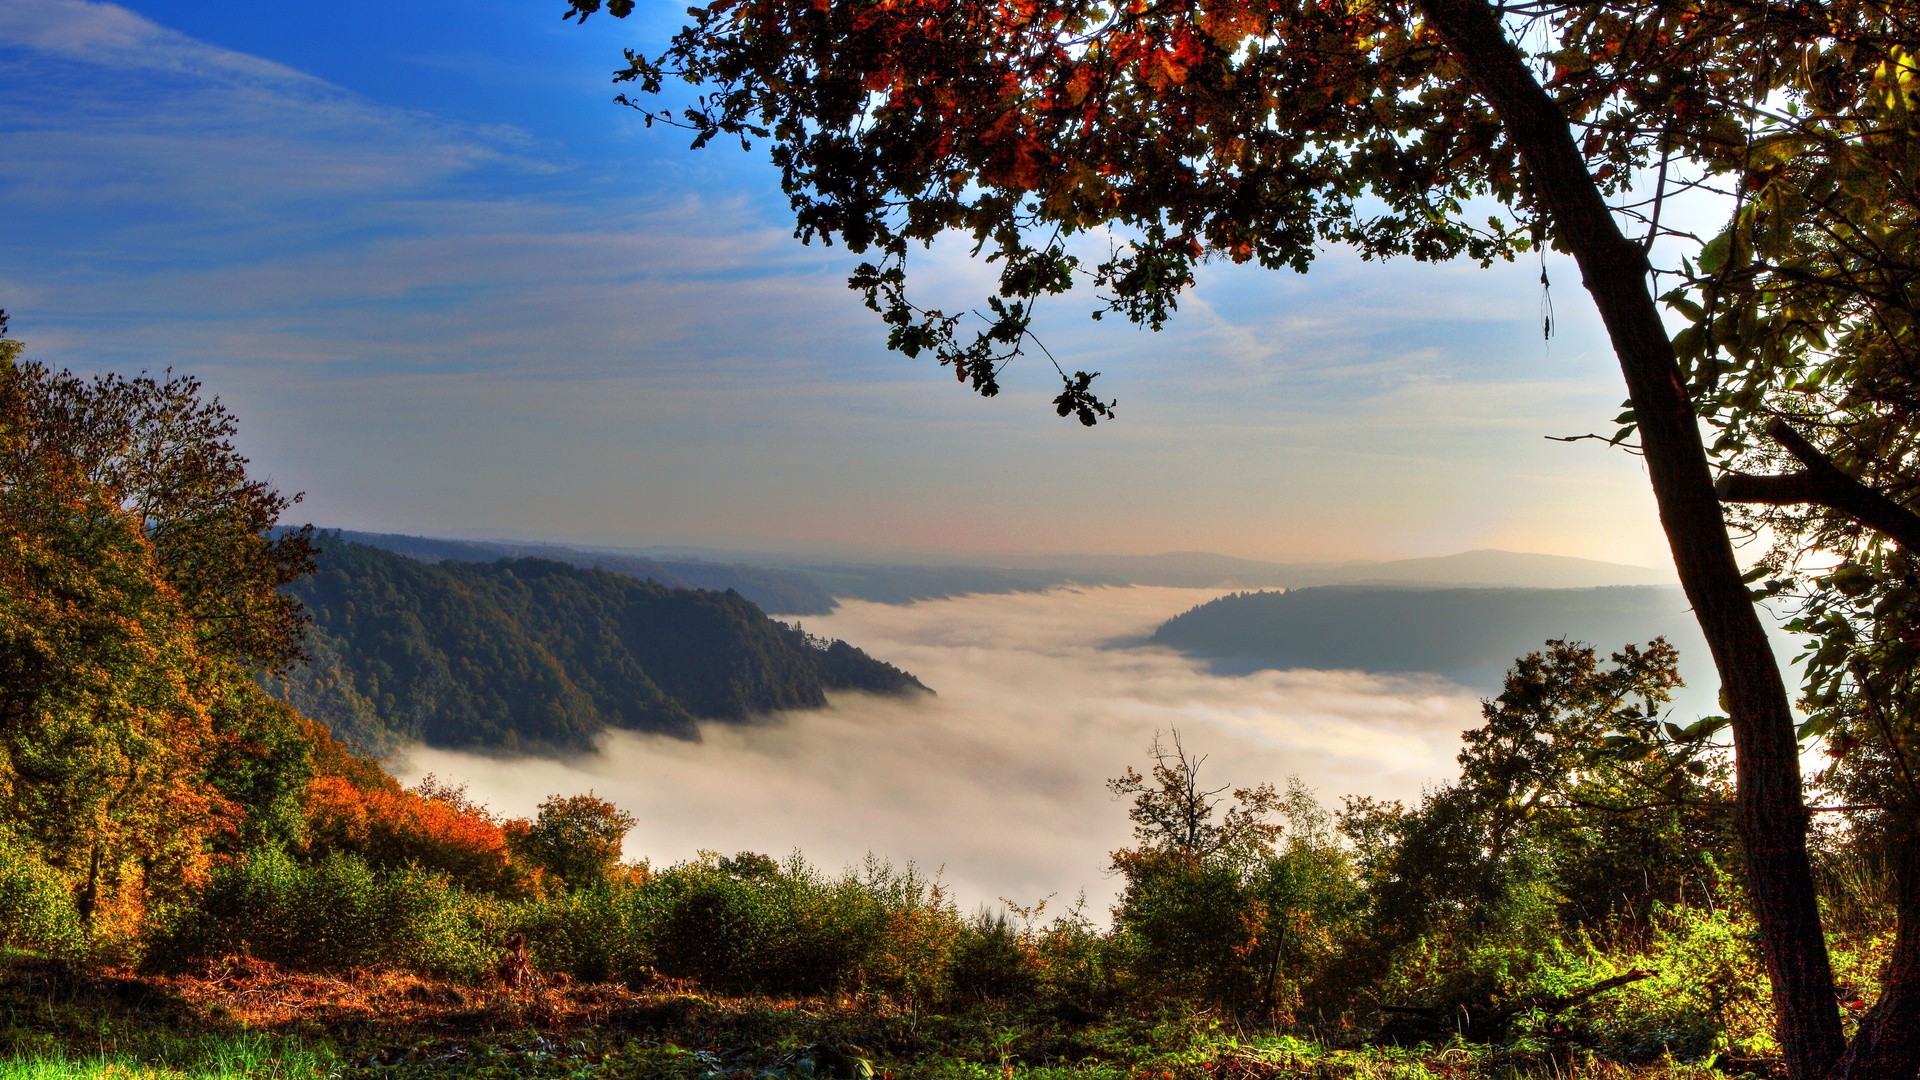 General 1920x1080 landscape trees red leaves clouds valley nature